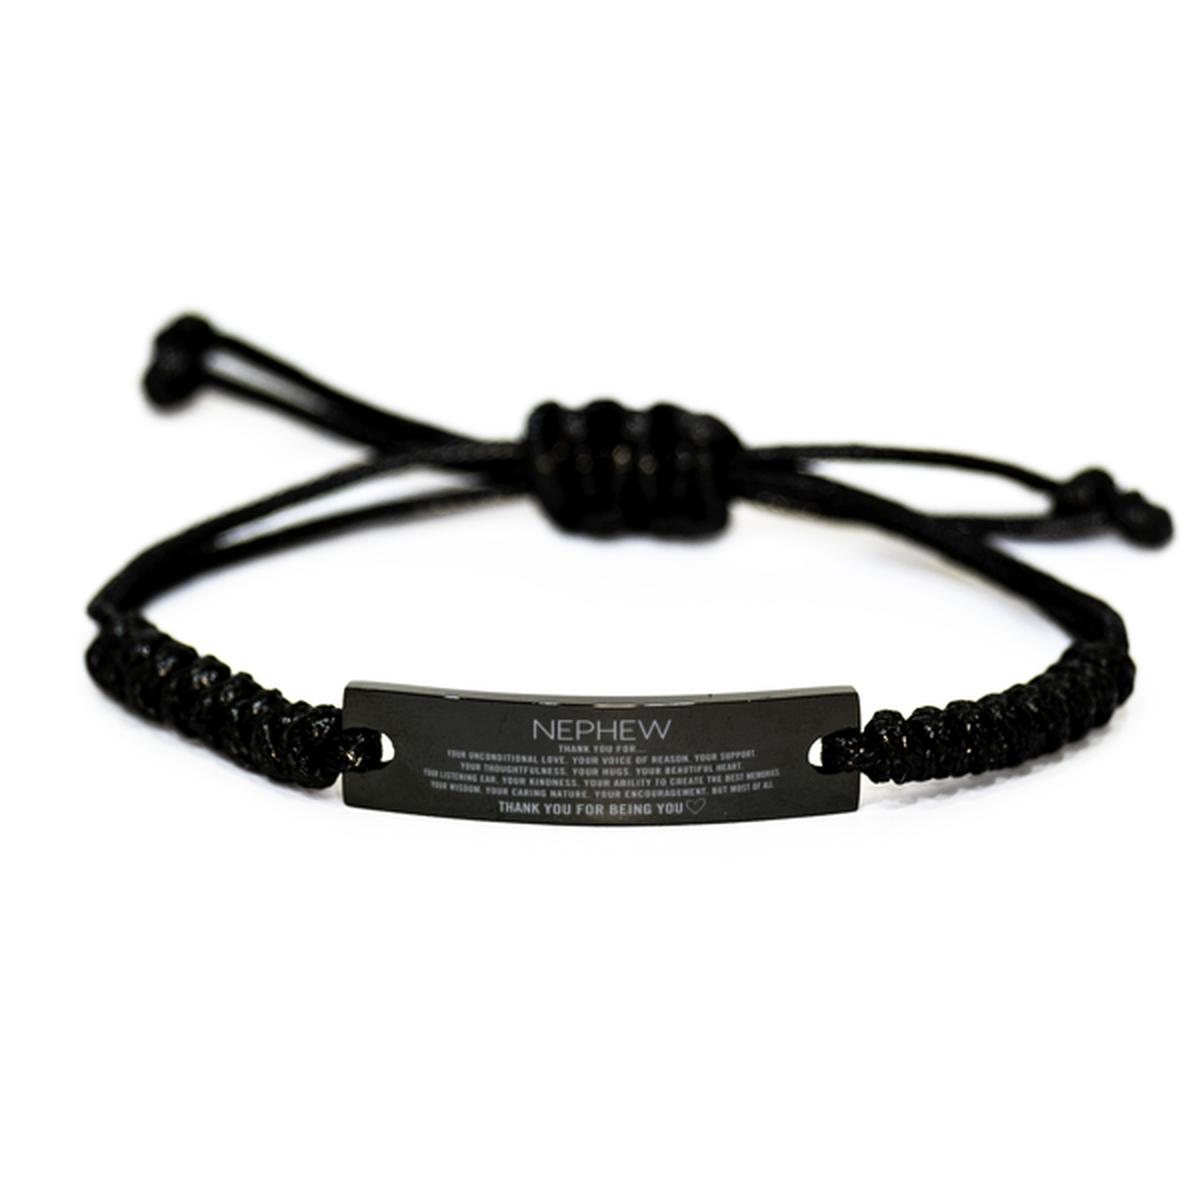 Nephew Black Rope Bracelet Custom, Engraved Gifts For Nephew Christmas Graduation Birthday Gifts for Men Women Nephew Thank you for Your unconditional love